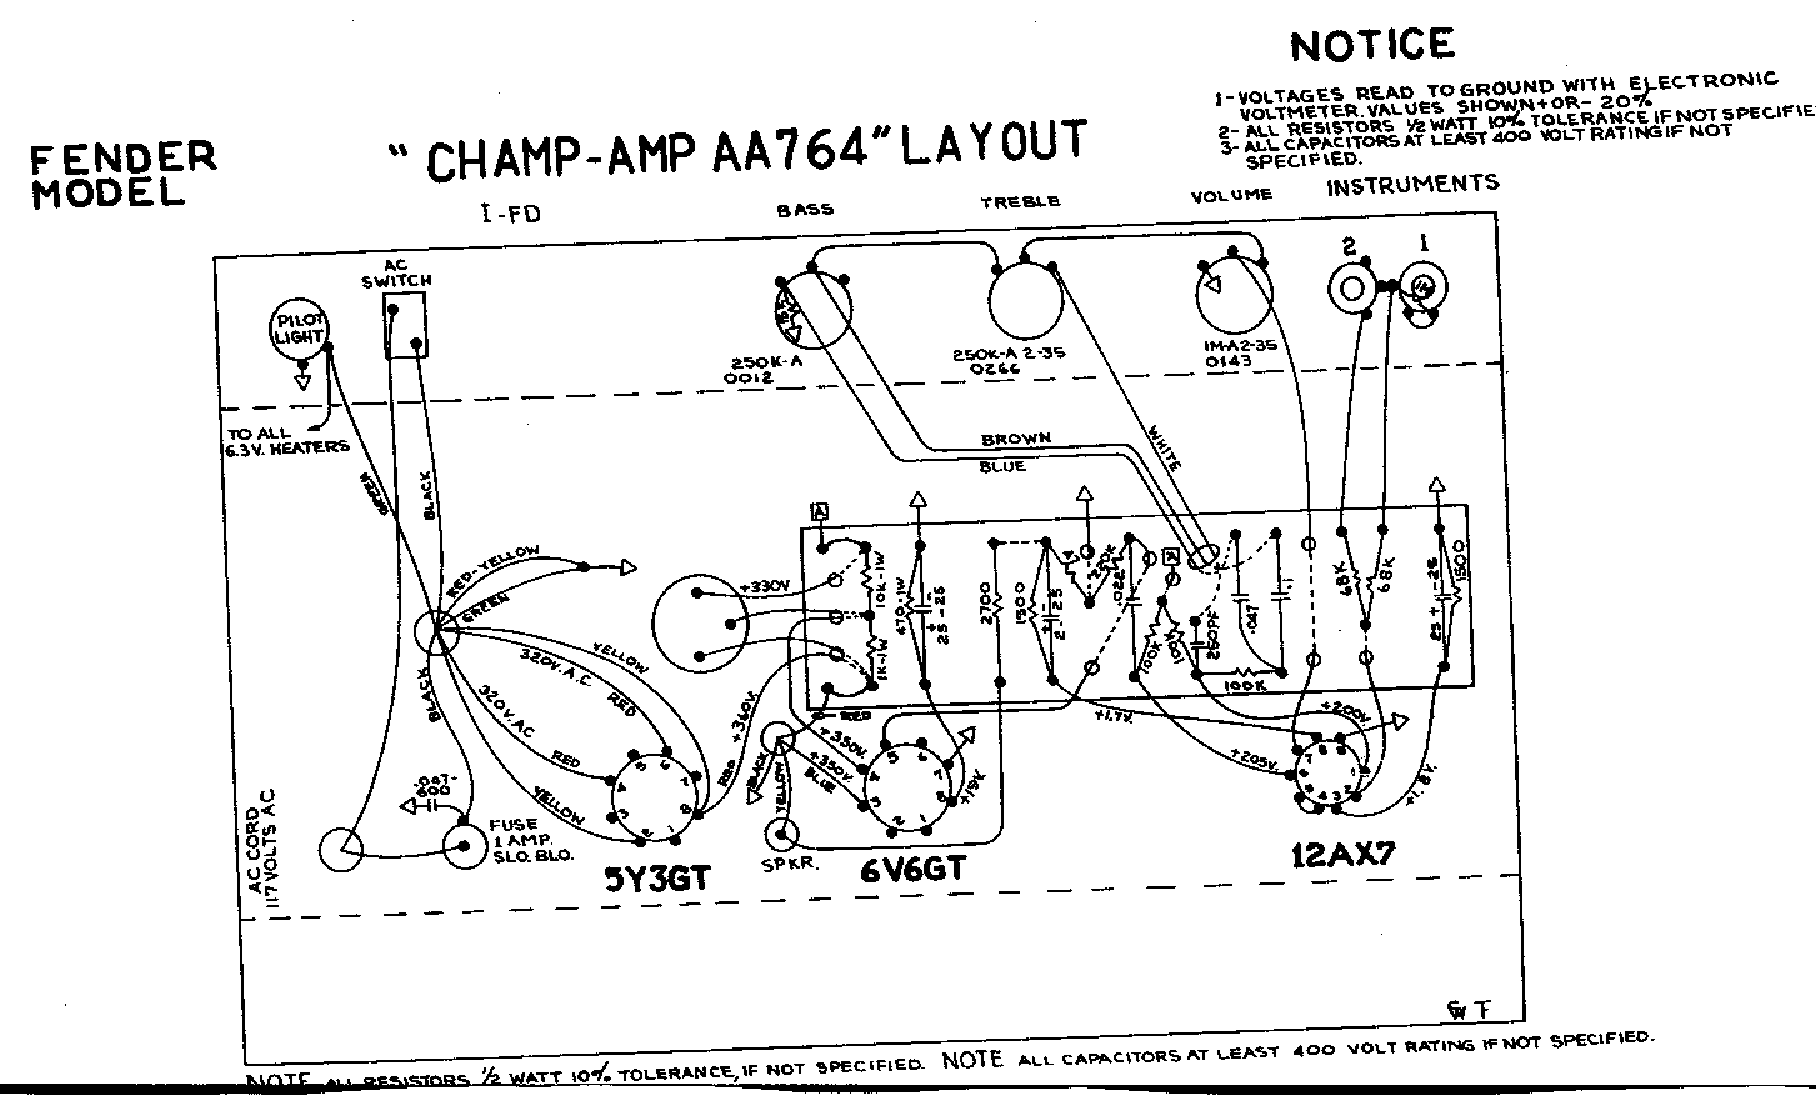 FENDER CHAMP AA-764 SCHEM service manual (2nd page)